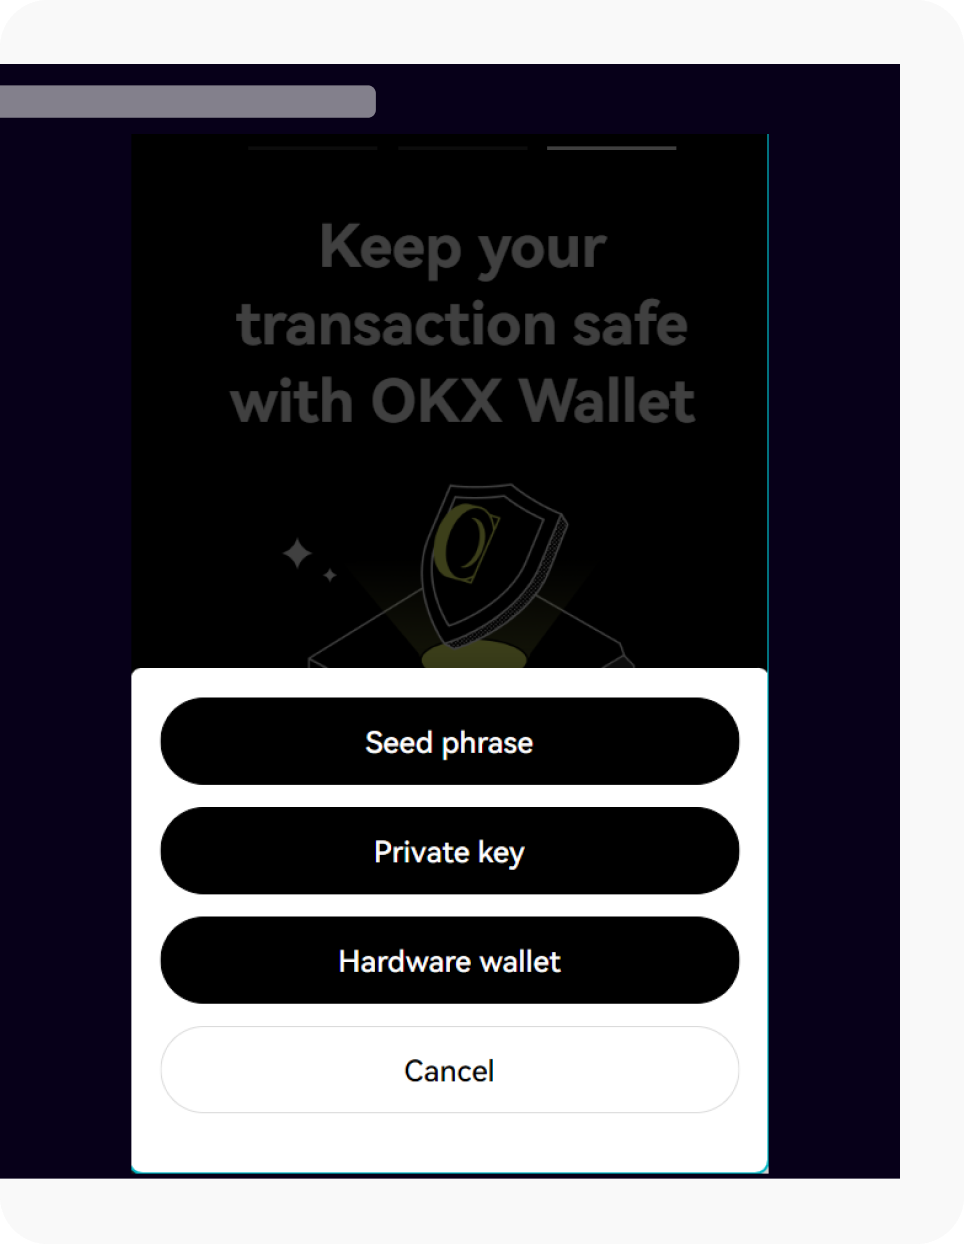 If it's your first time logging into OKX wallet, select I already have a wallet